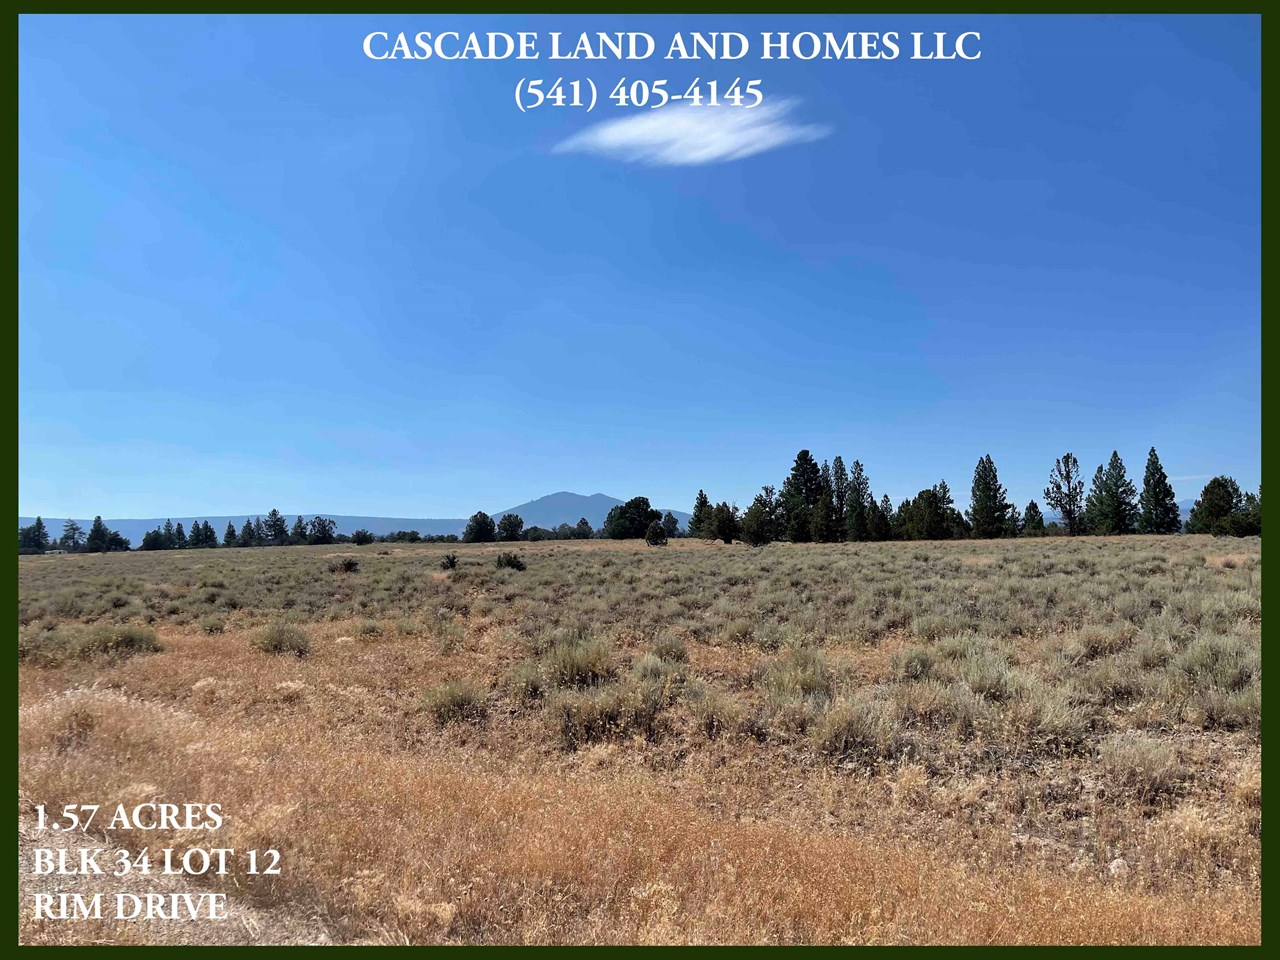 owner-may-carry financing on this large 1.57 acre parcel! the property adjoining this property is also for sale from the same owner, make an offer on both, and increase your property to 3.24 acres! 
the property is located on a high mountain plateau, at about 4,000 feet and sits above the lush sprague river valley. the river is only about a mile from here, and offers excellent fly-fishing! there are unlimited recreational opportunities in the wilderness that surrounds you here! the property is in a more secluded part of the subdivision for added privacy.